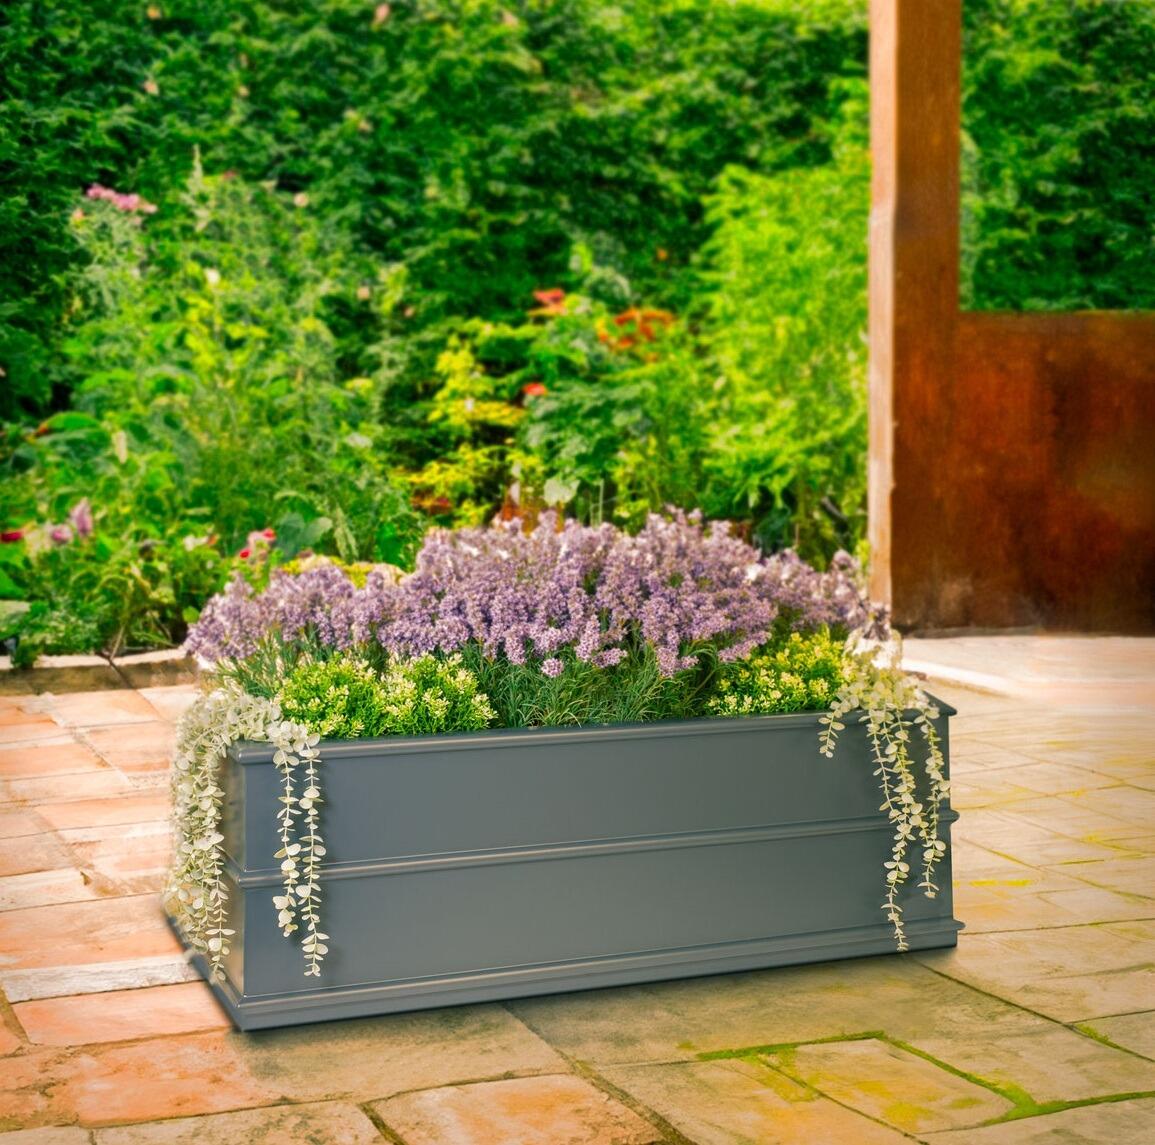 grey classic garden trougfh planter with decorative trim for outdoor planting